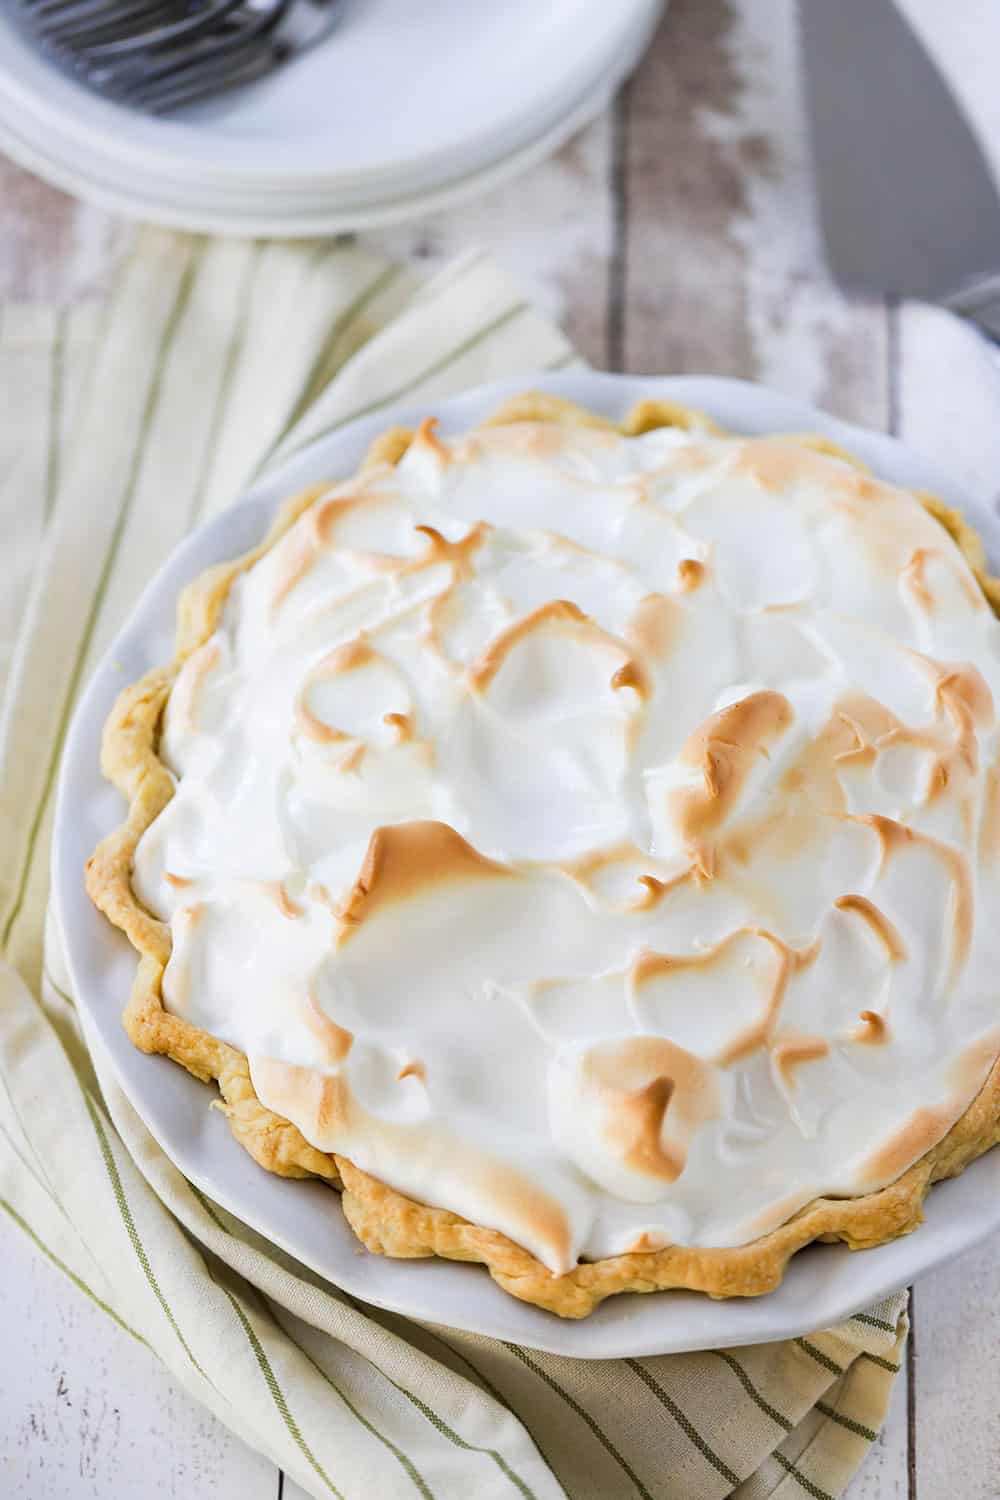 An overhead view of a lemon meringue pie with the topping lightly browned and sitting next to a striped napkin and dessert plates with forks.